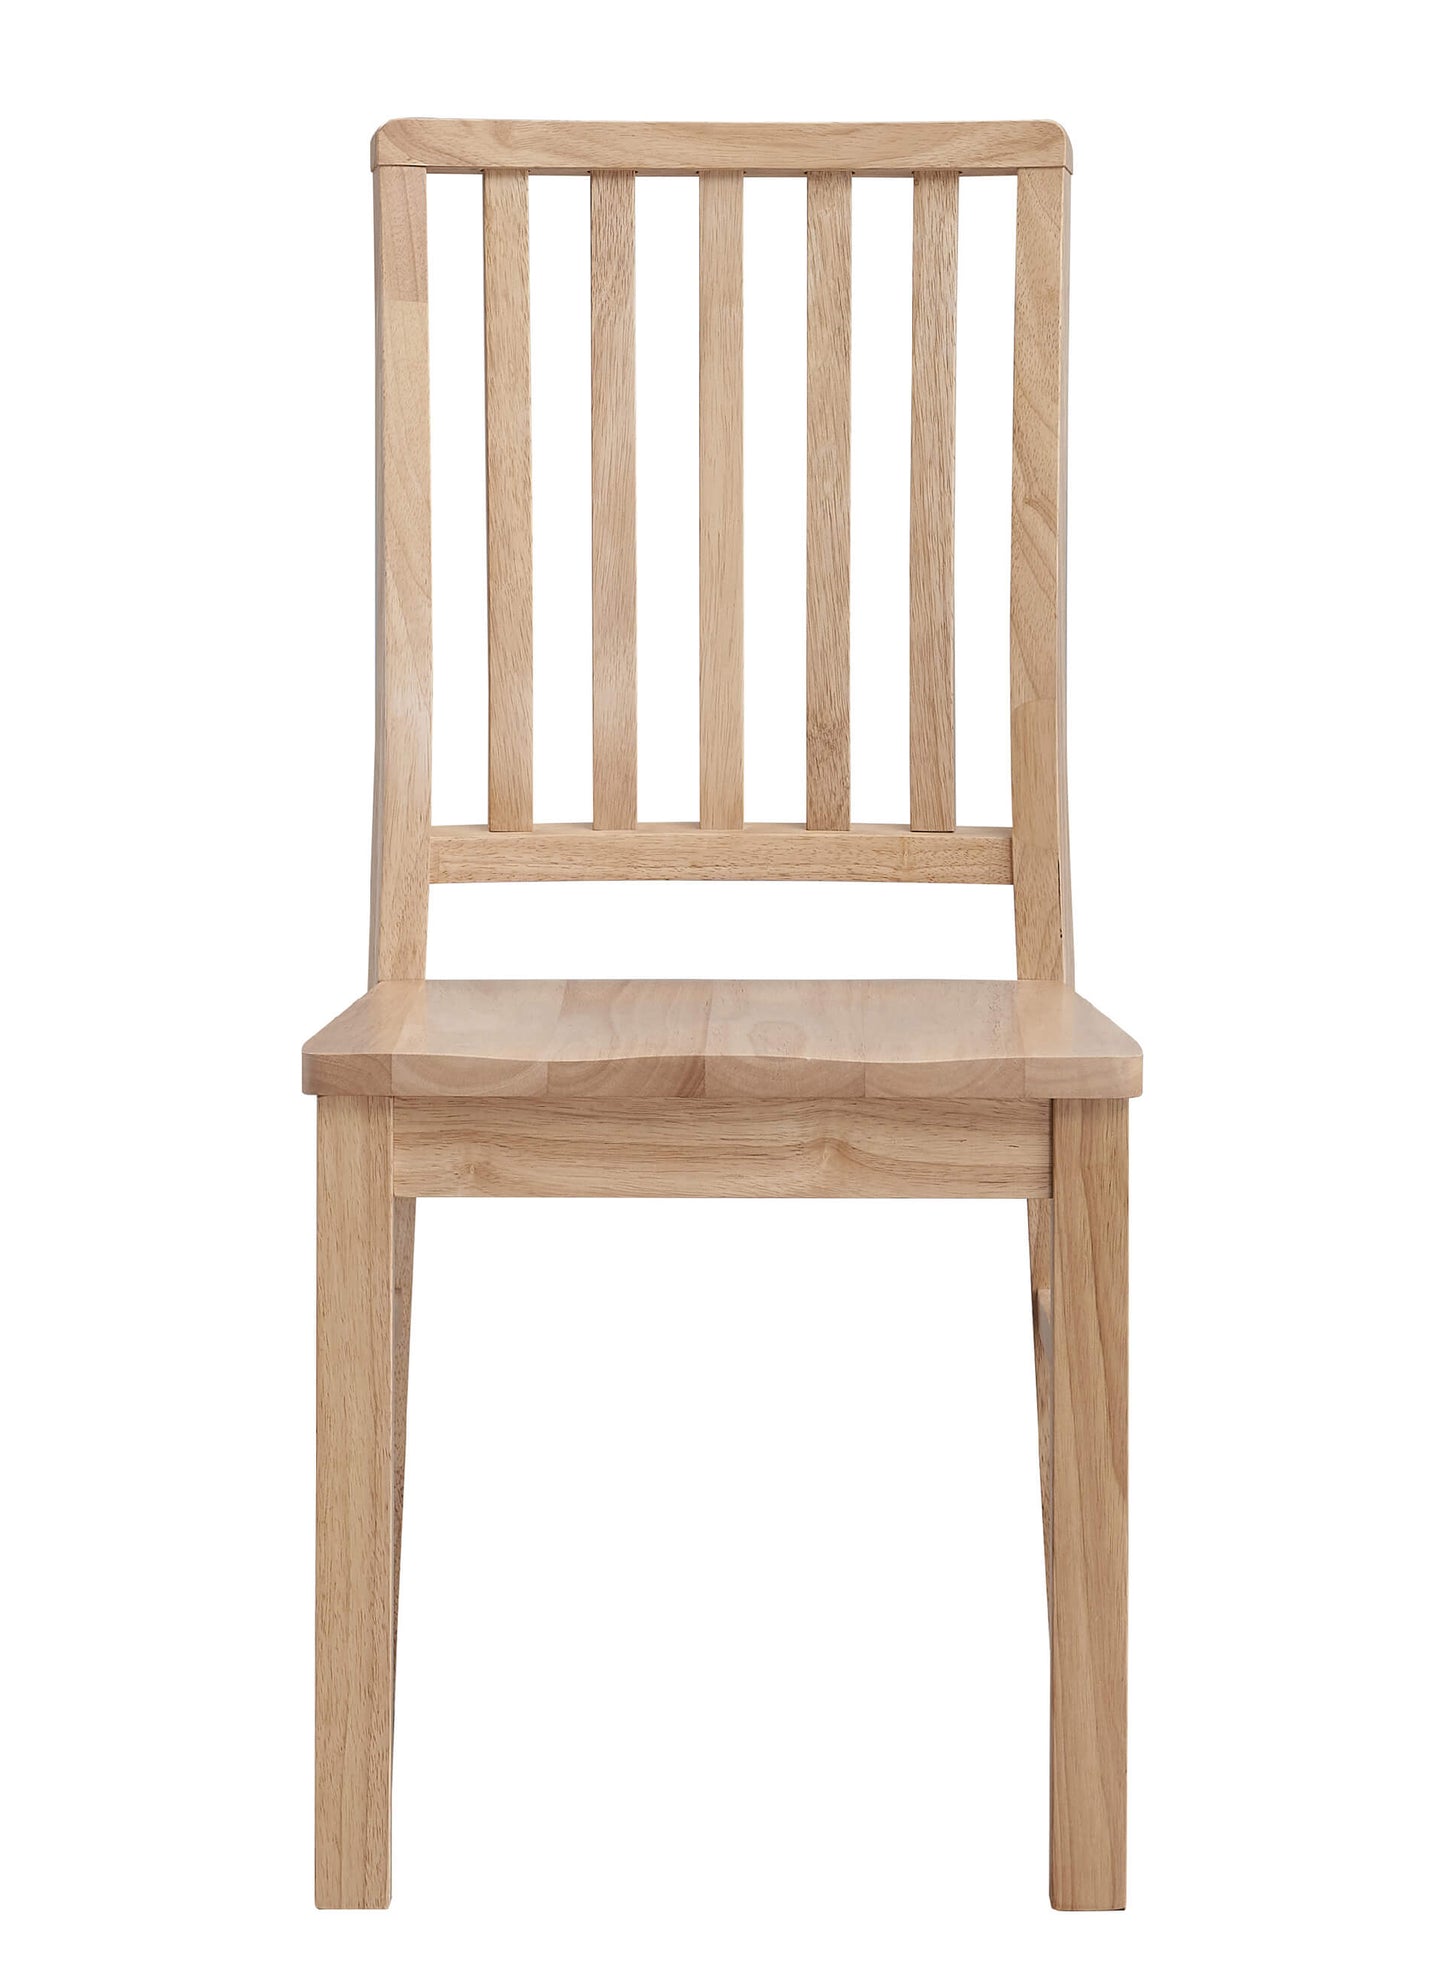 Cooper Dining Chair Solid Seat - Oak